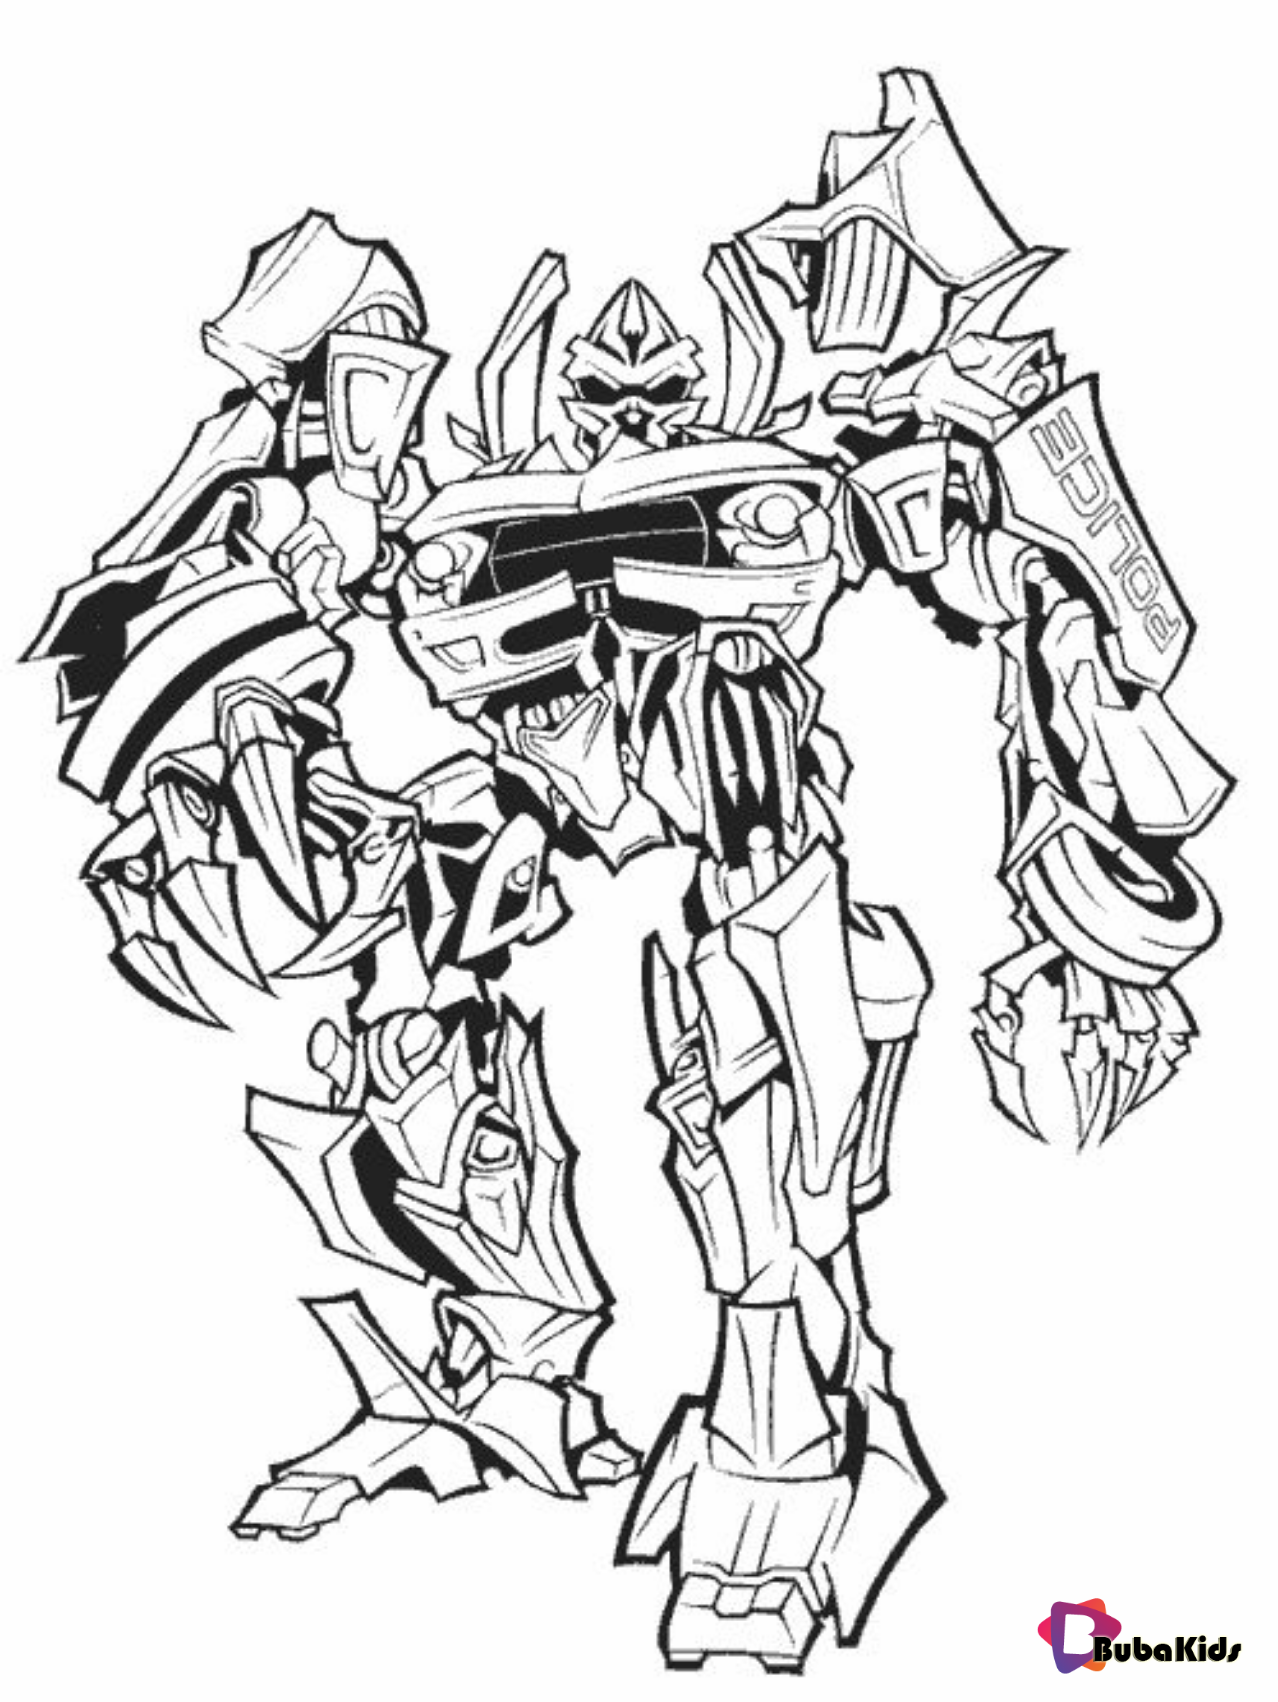 Transformer coloring pages and printable on bubakids.com Wallpaper